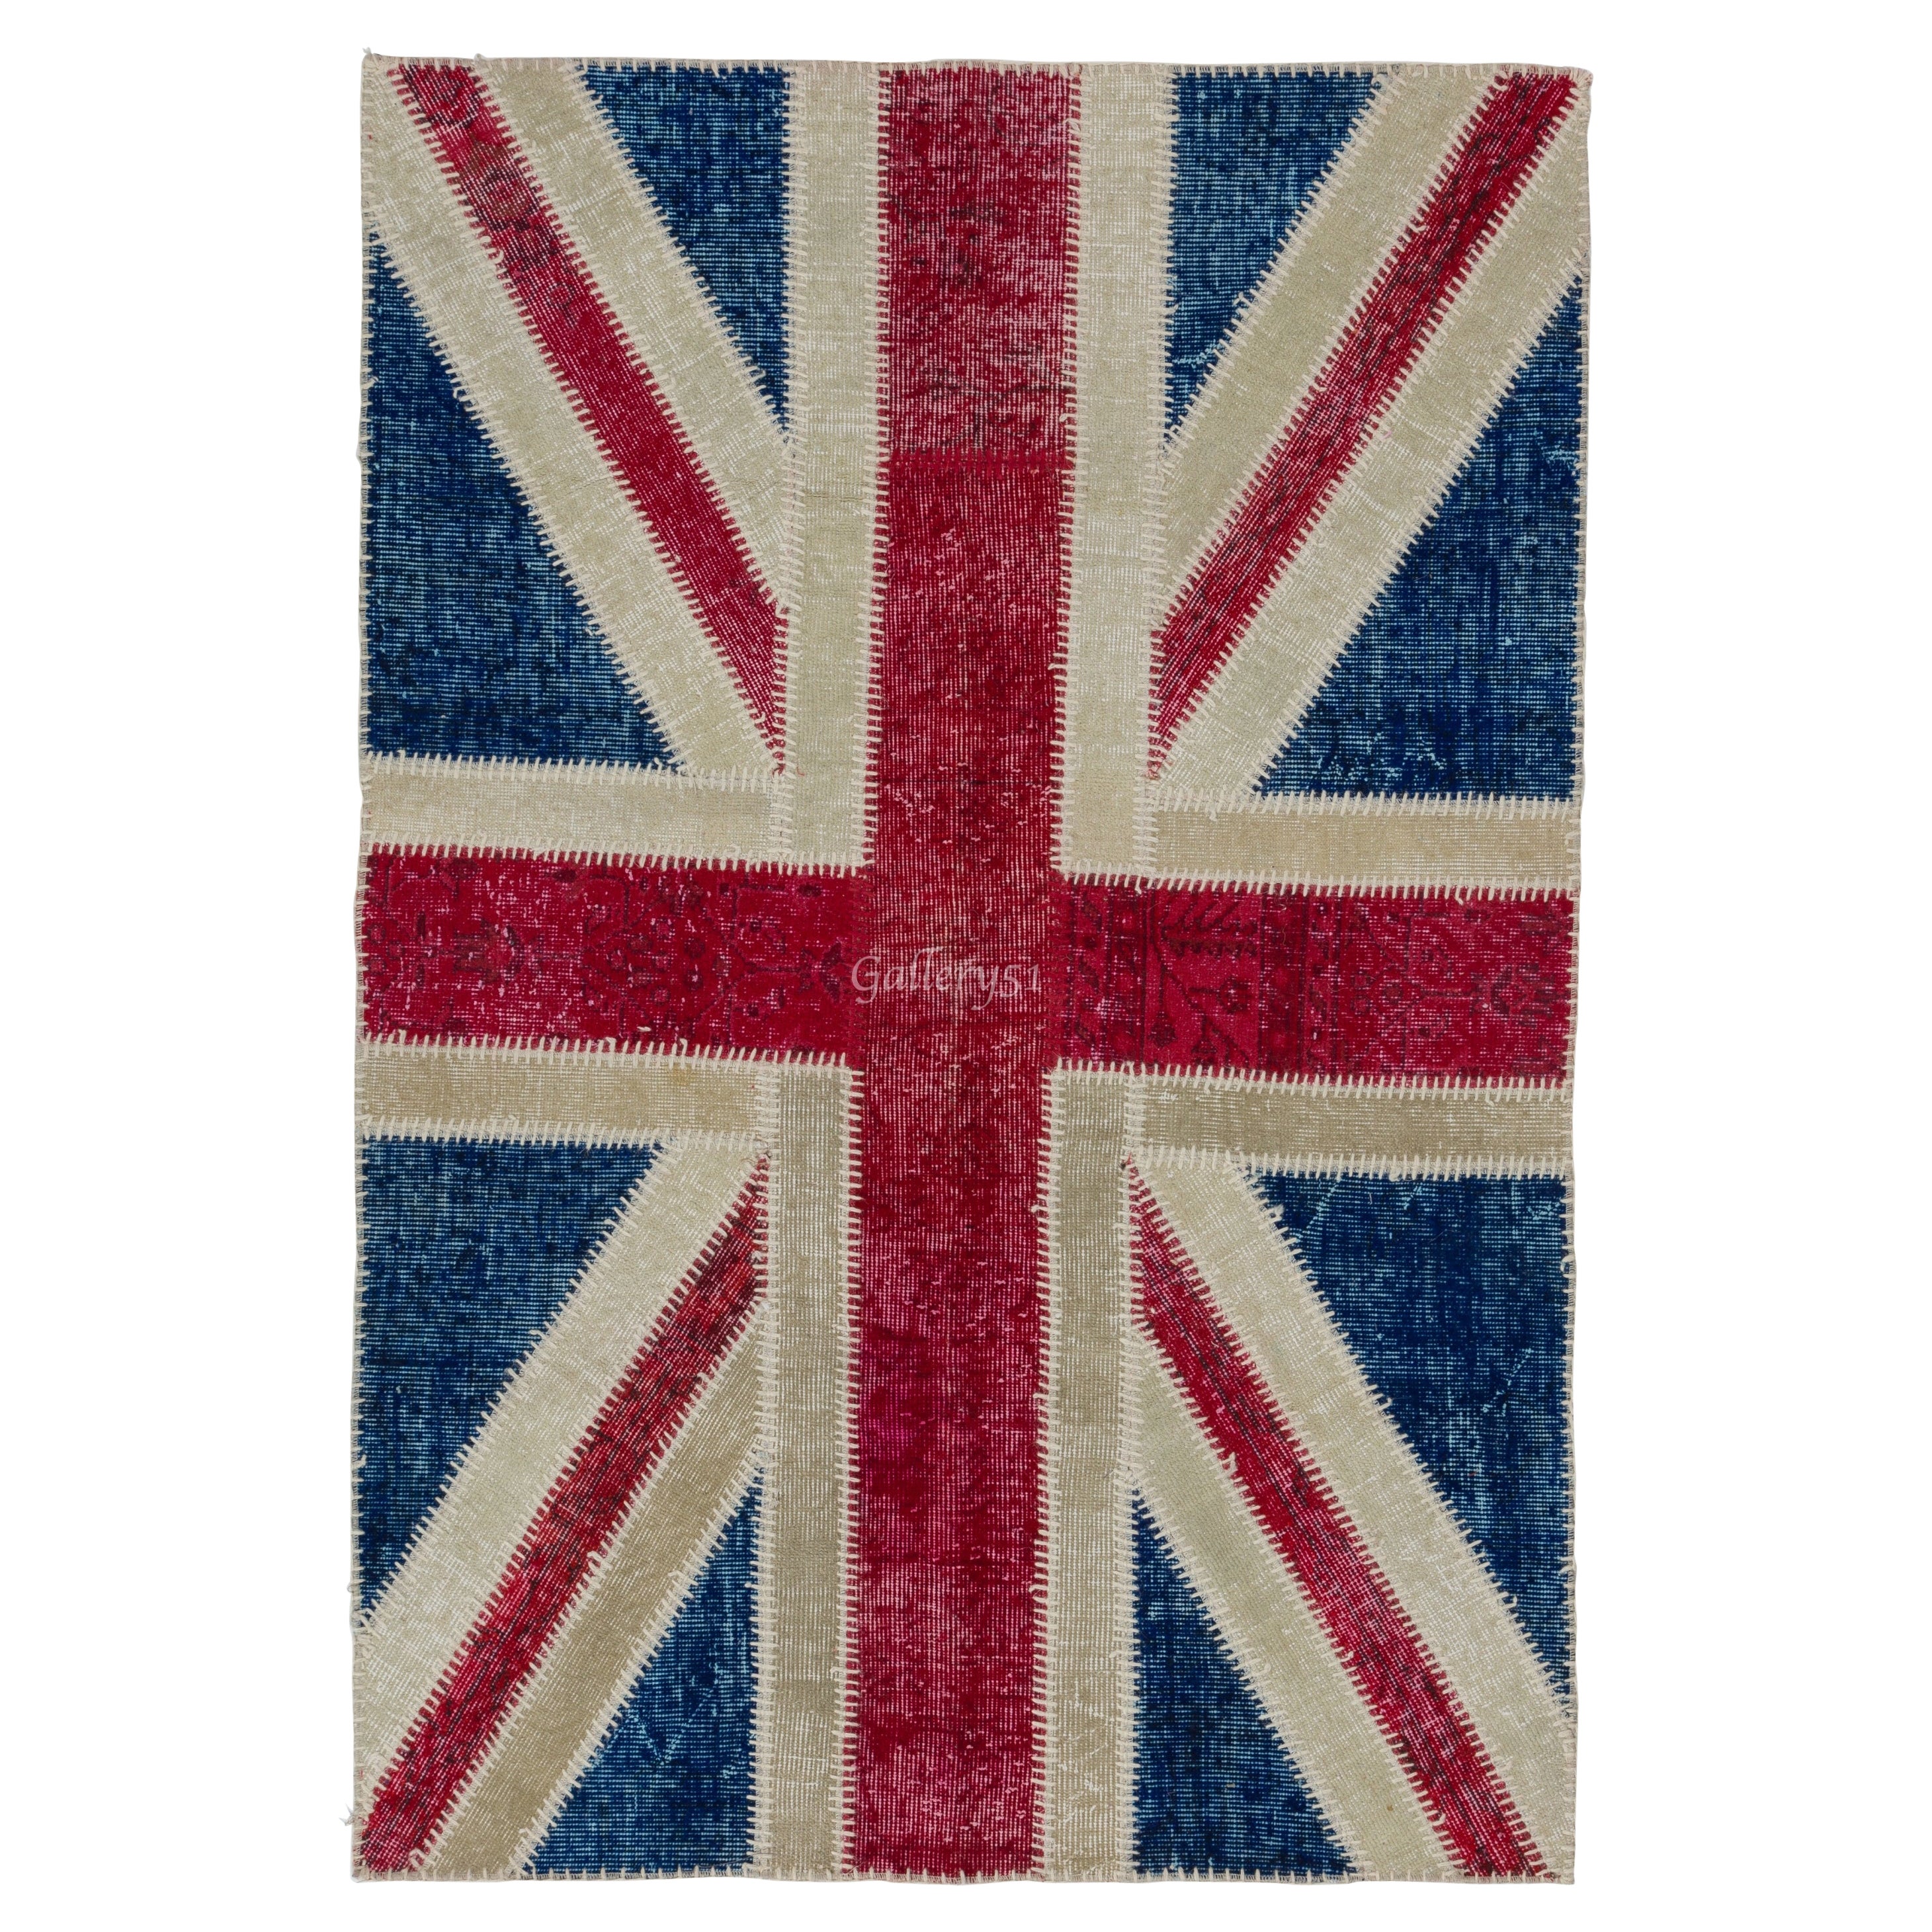 Union Jack British Flag Design Patchwork Rug. Custom Colors and Sizes For Sale